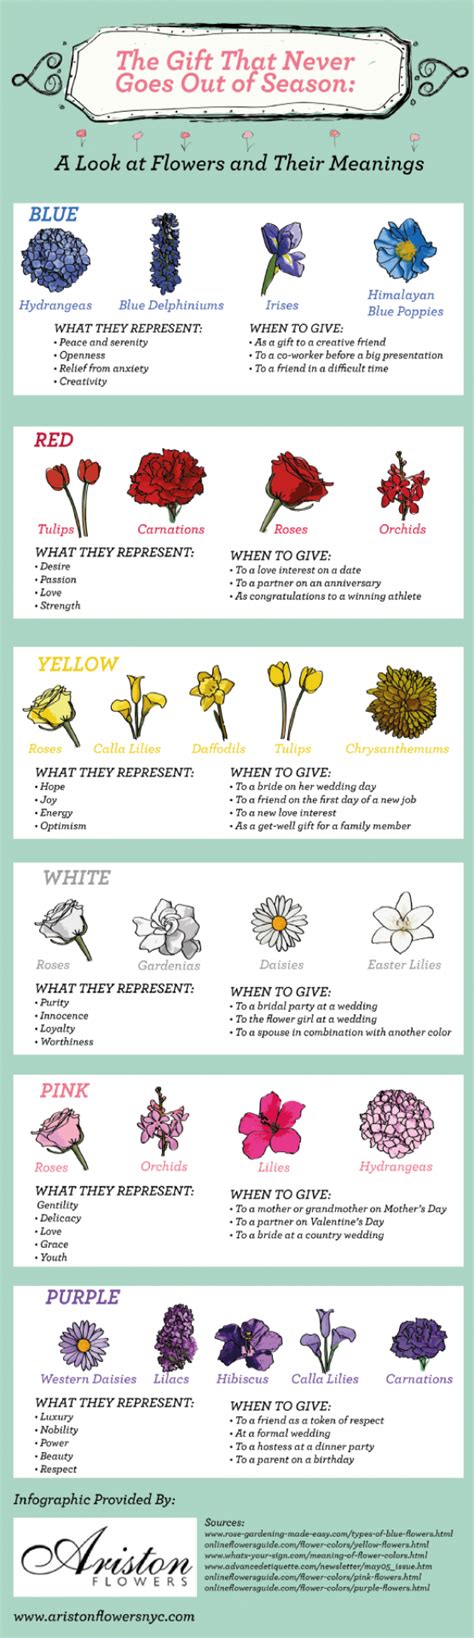 Pin By Thetoyzone On Awesome Infographics Infographic Board Flower